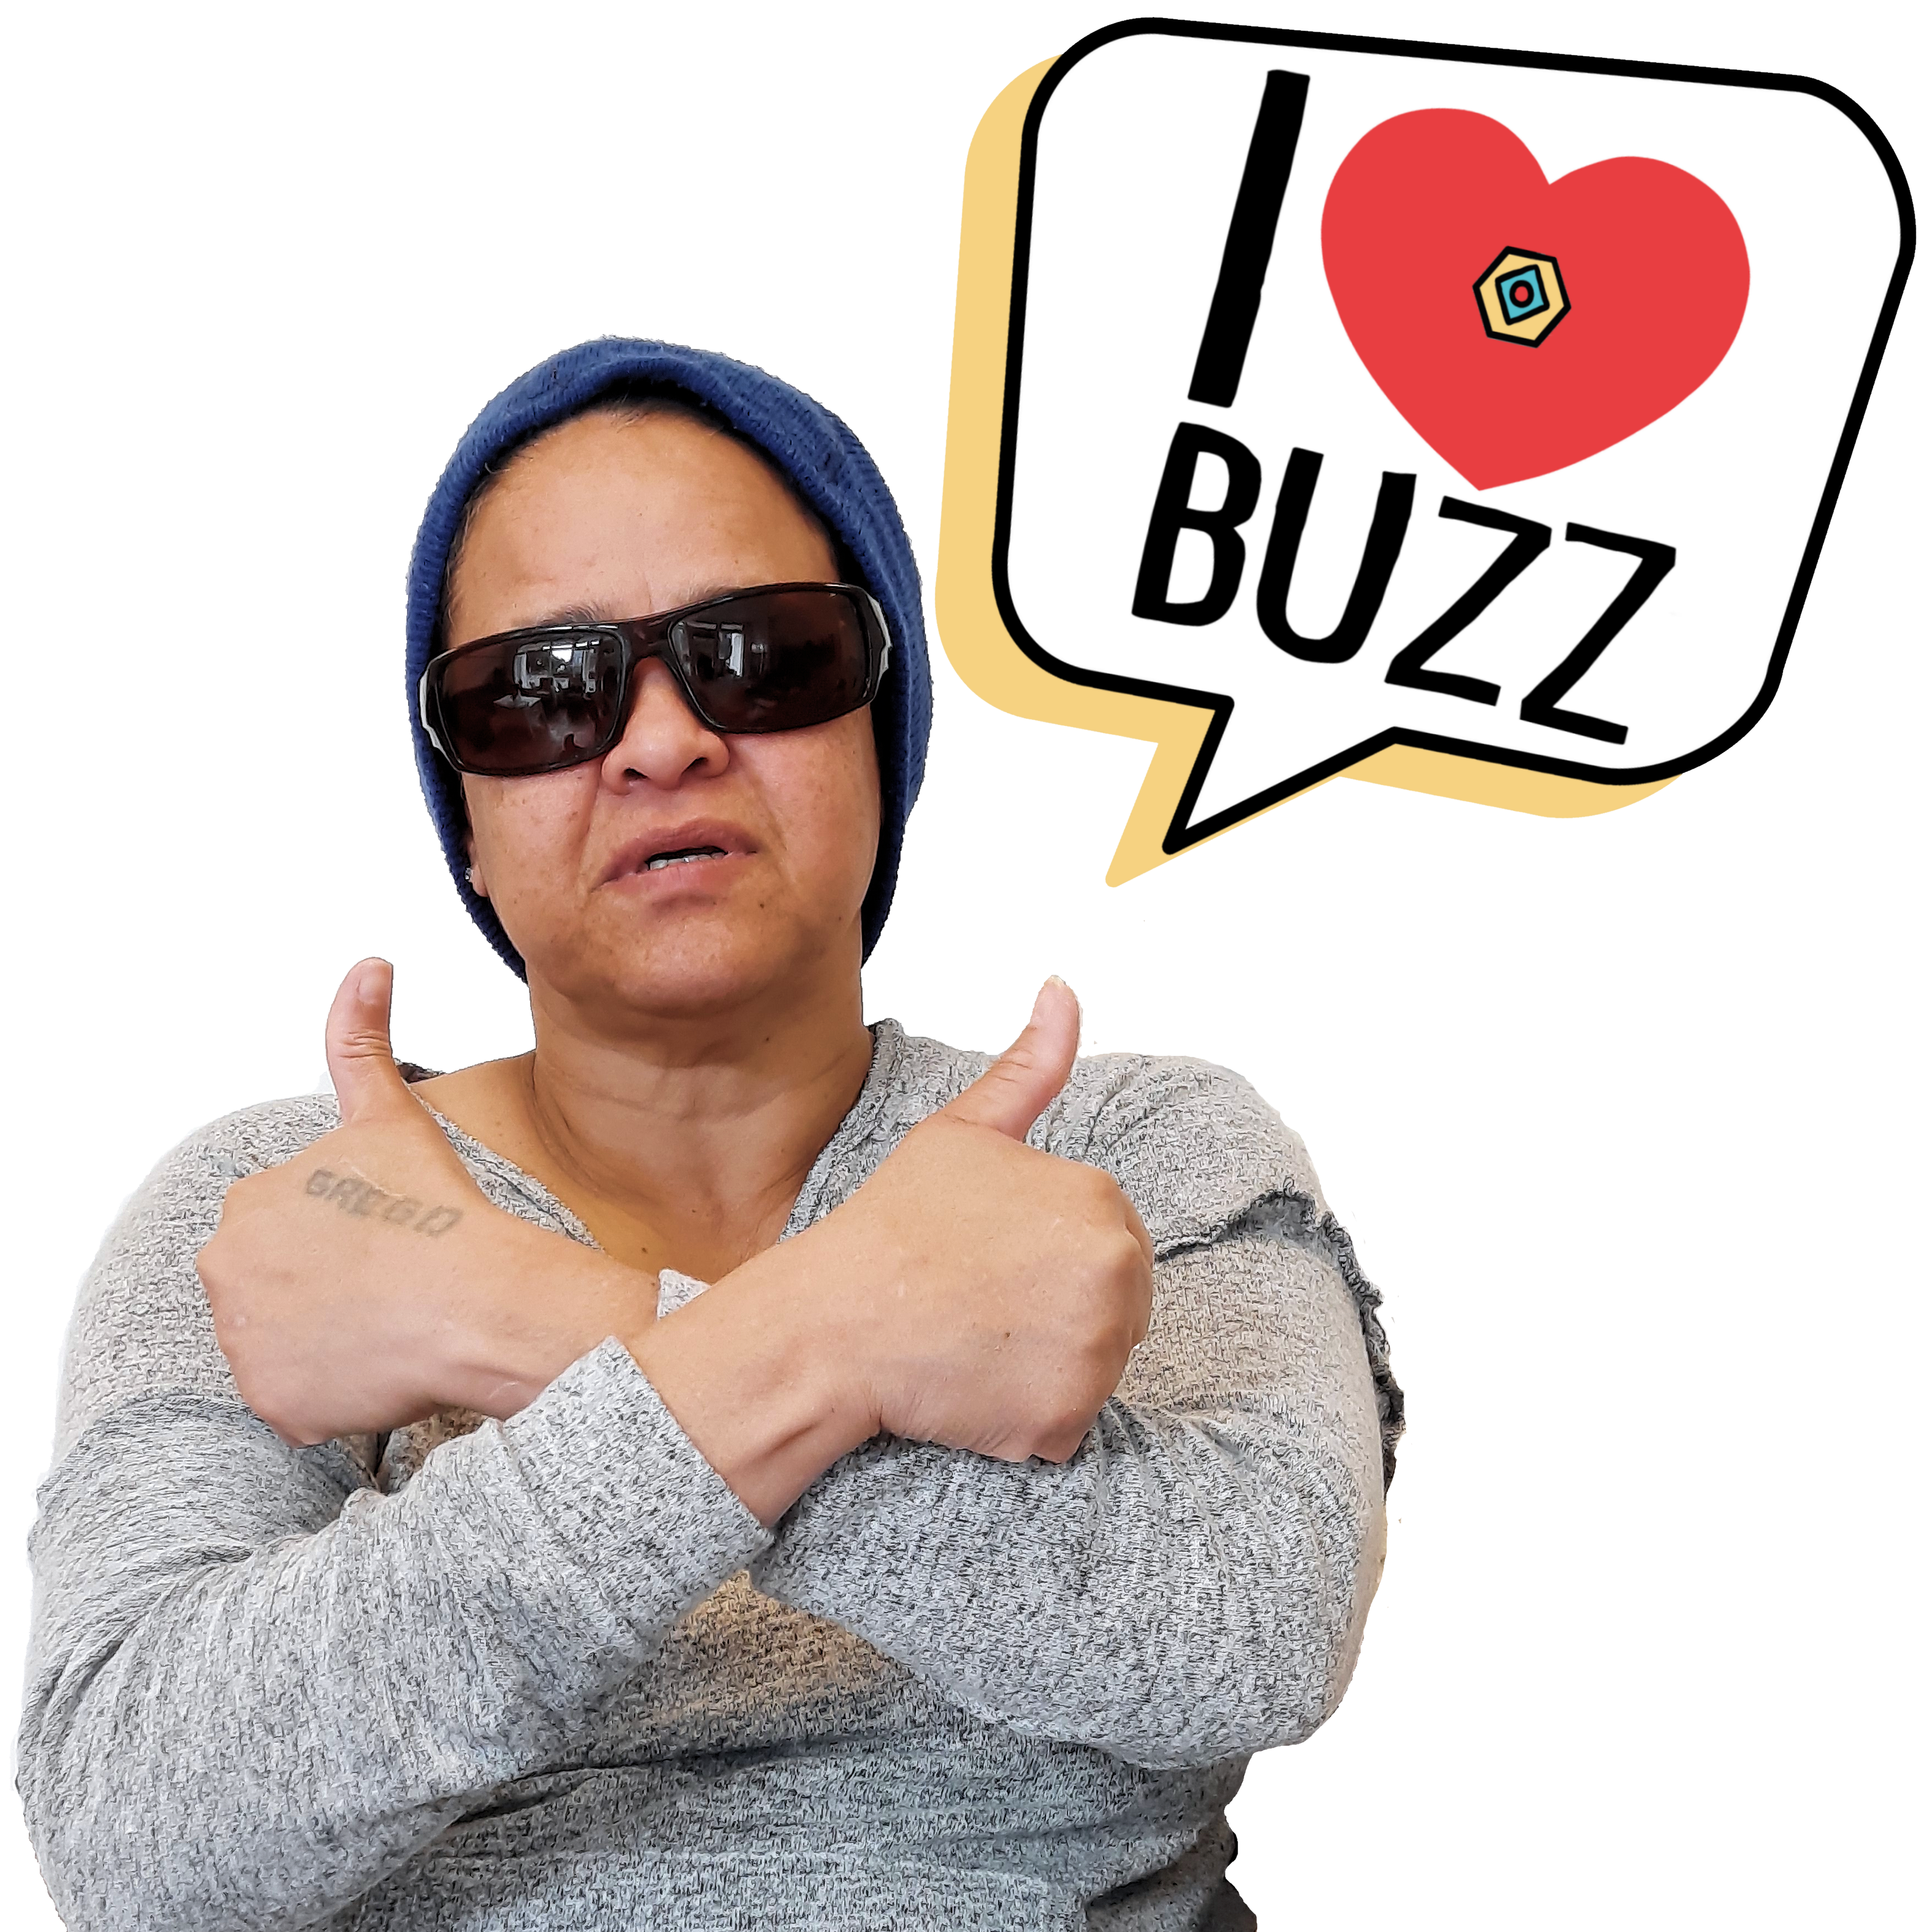 Nathaly loves BuZz